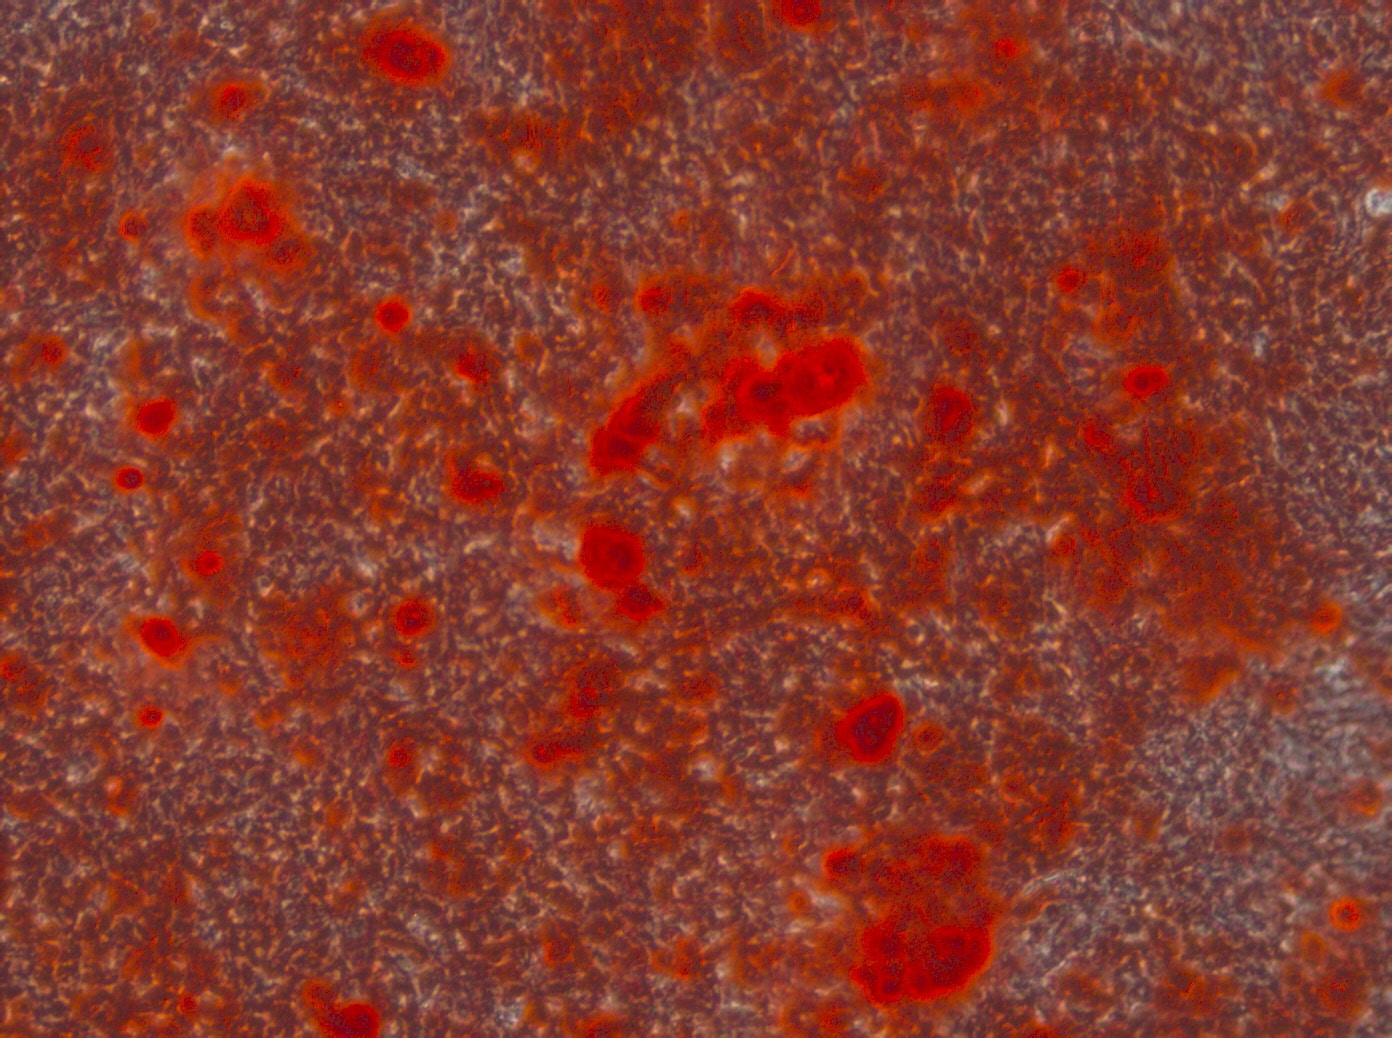 human osteoblast cell culture alizarin red s